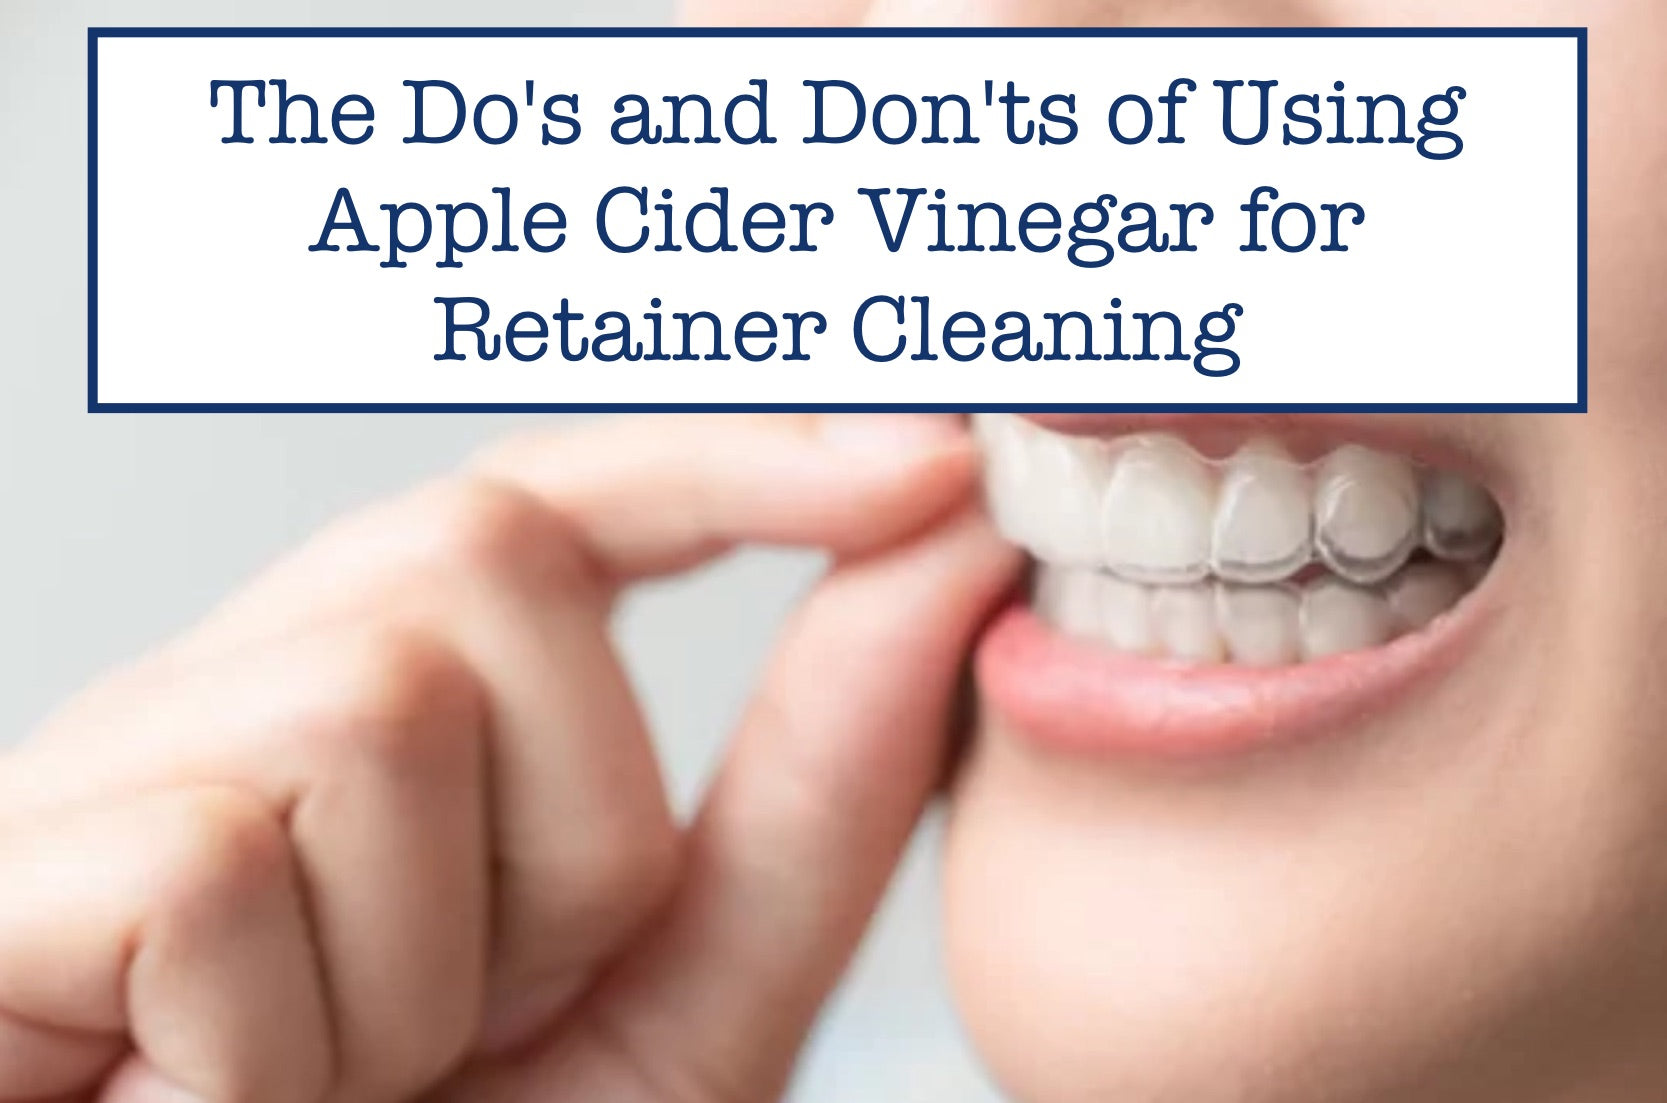 The Do's and Don'ts of Using Apple Cider Vinegar for Retainer Cleaning